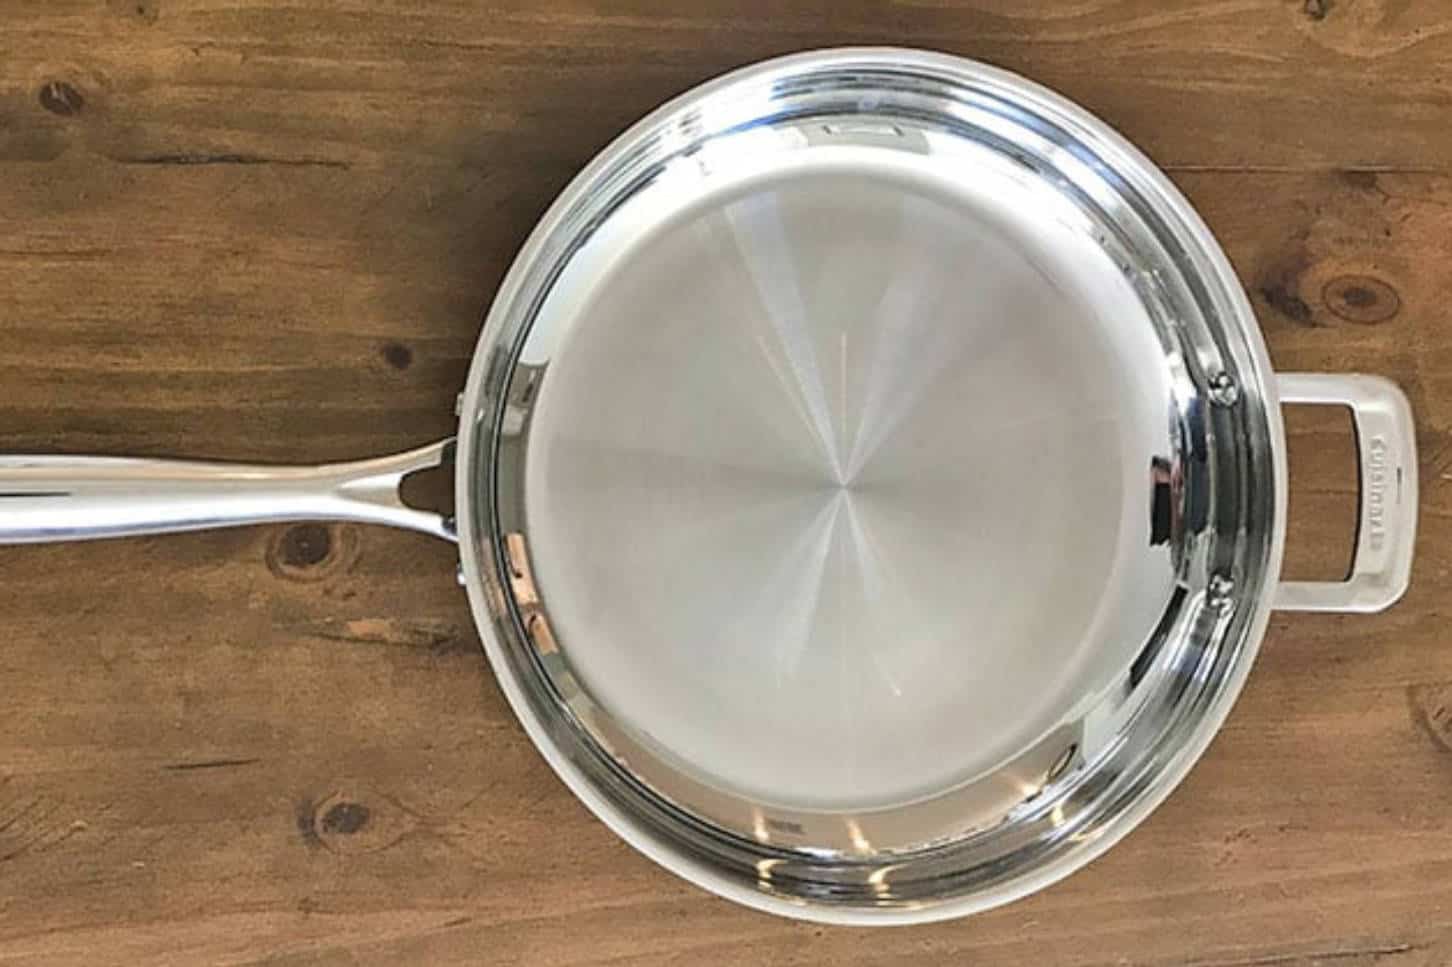 Cuisinart Pots and Pans-2022 in Depth Review